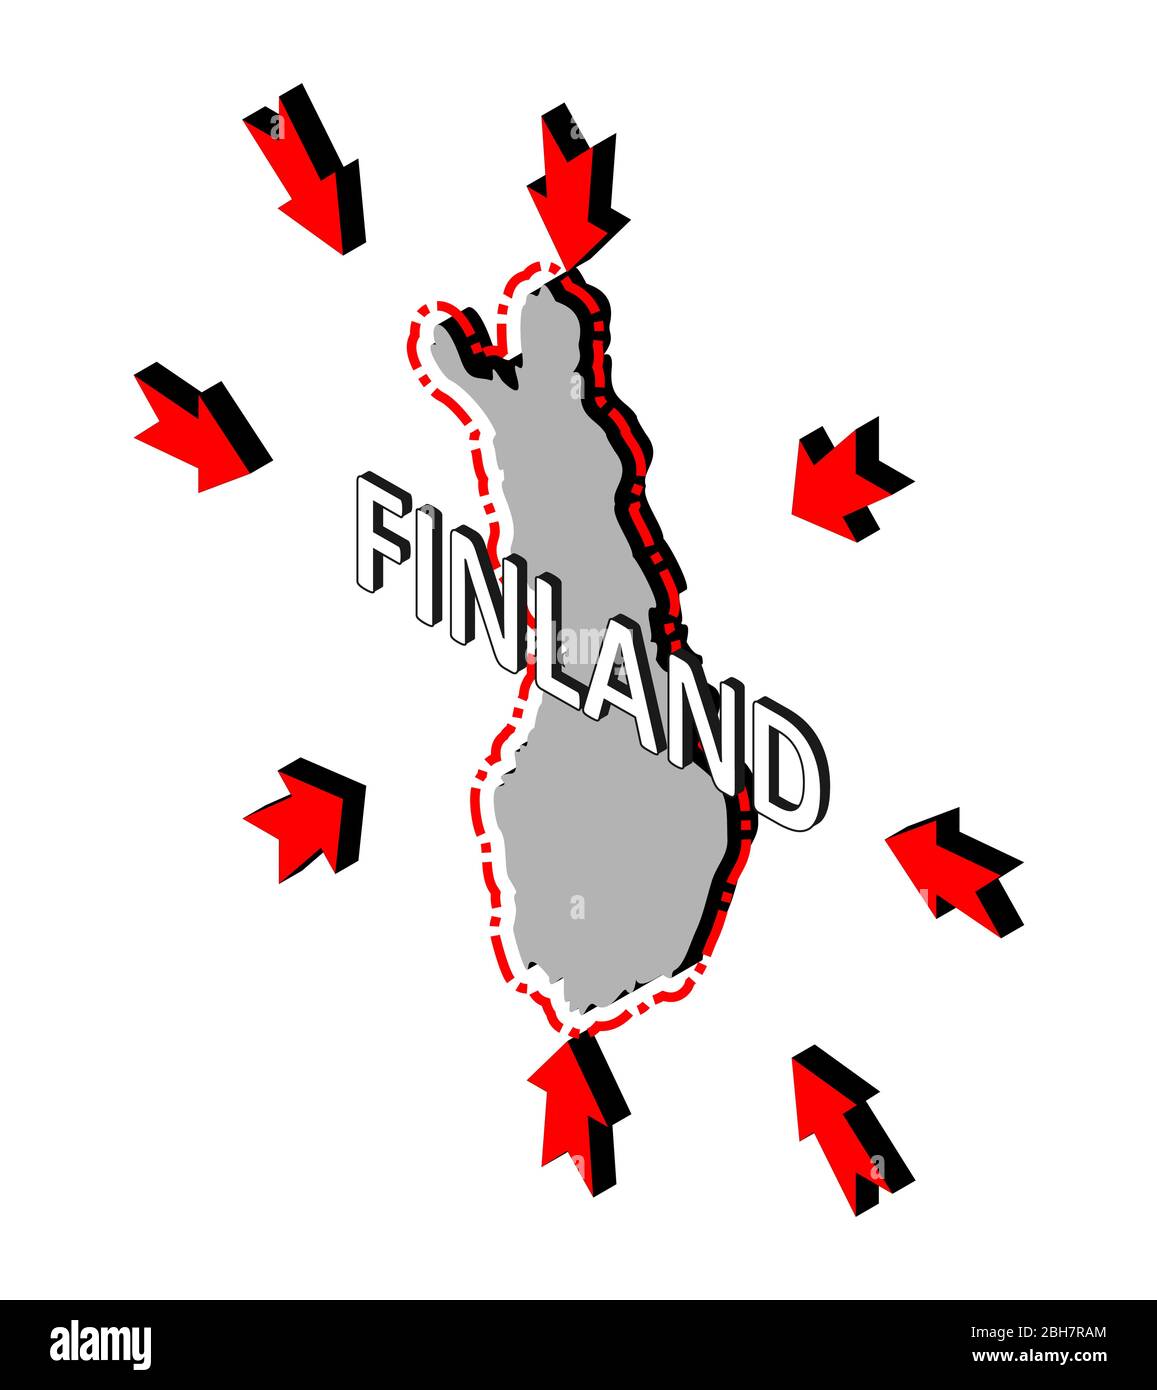 Finland closes borders, quarantine, protection against coronavirus. Ban on crossing borders. Vector isometric image of Finland map with arrows around. Stock Vector